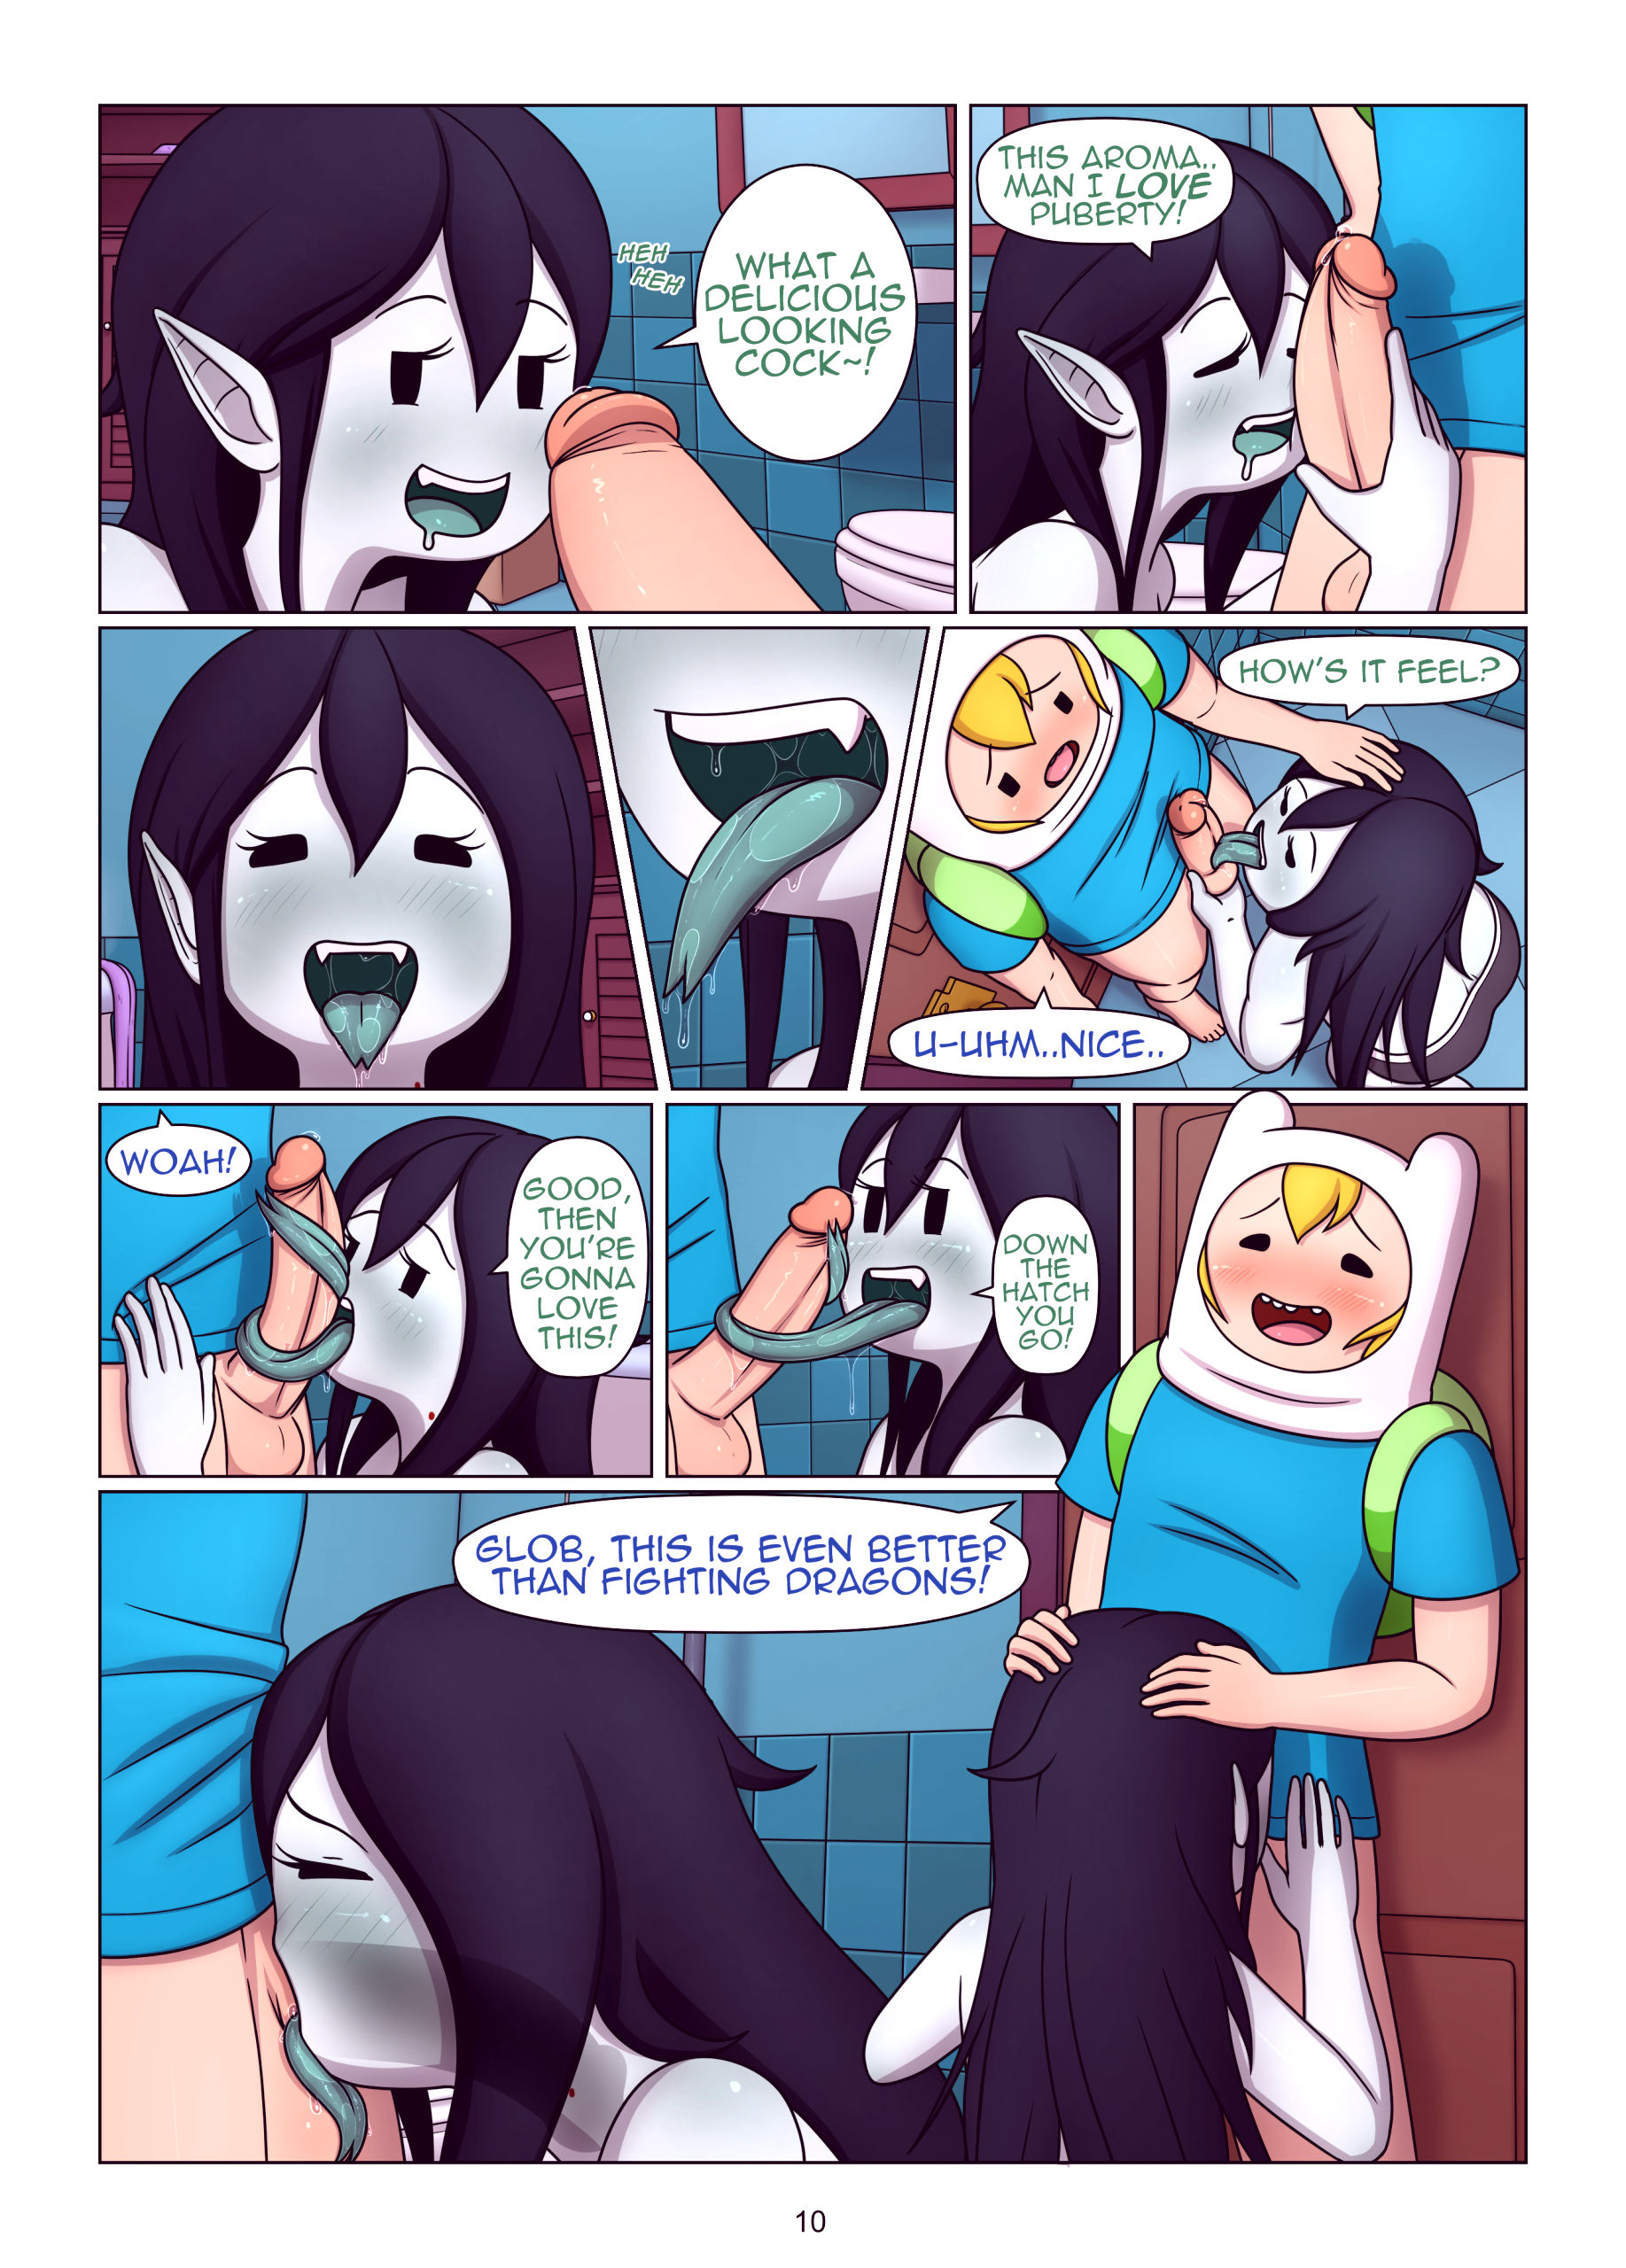 Misadventure time the collection porn comic picture 11